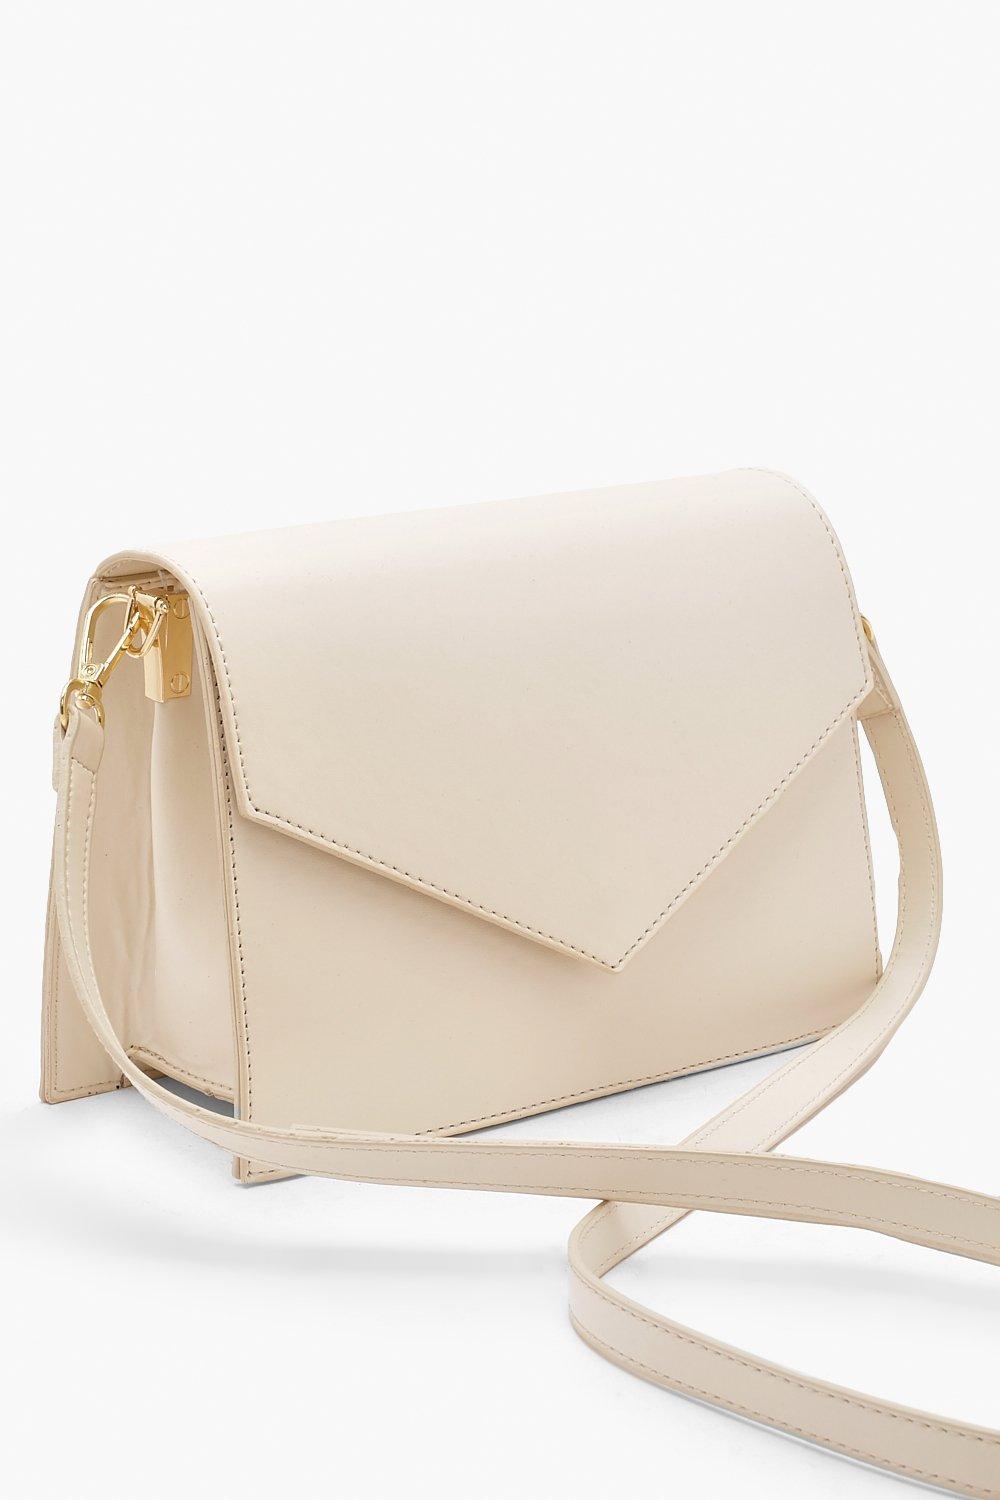 Kate spade pebbled leather fold over flap bag crea | Nuuly Thrift